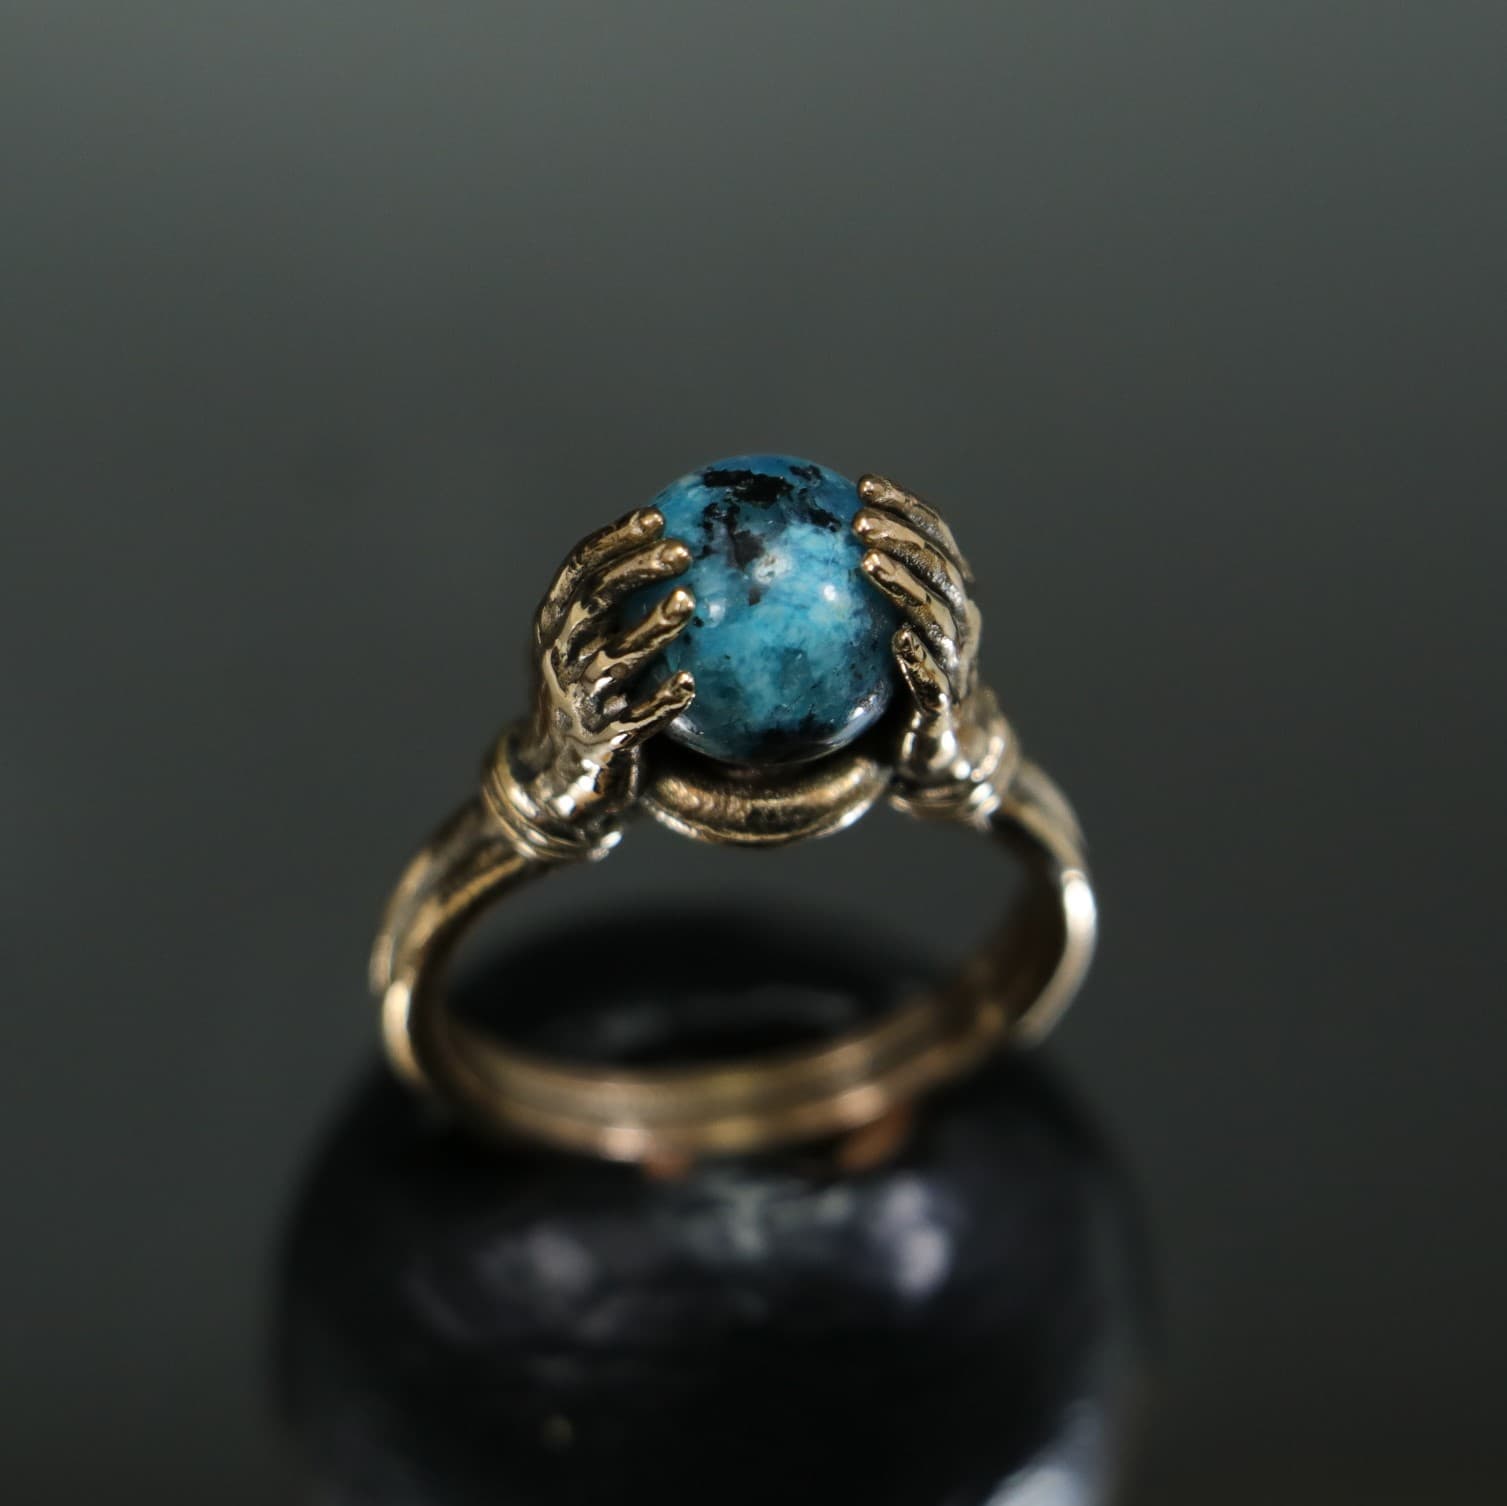 Turquoise Stone Ring Between Hands